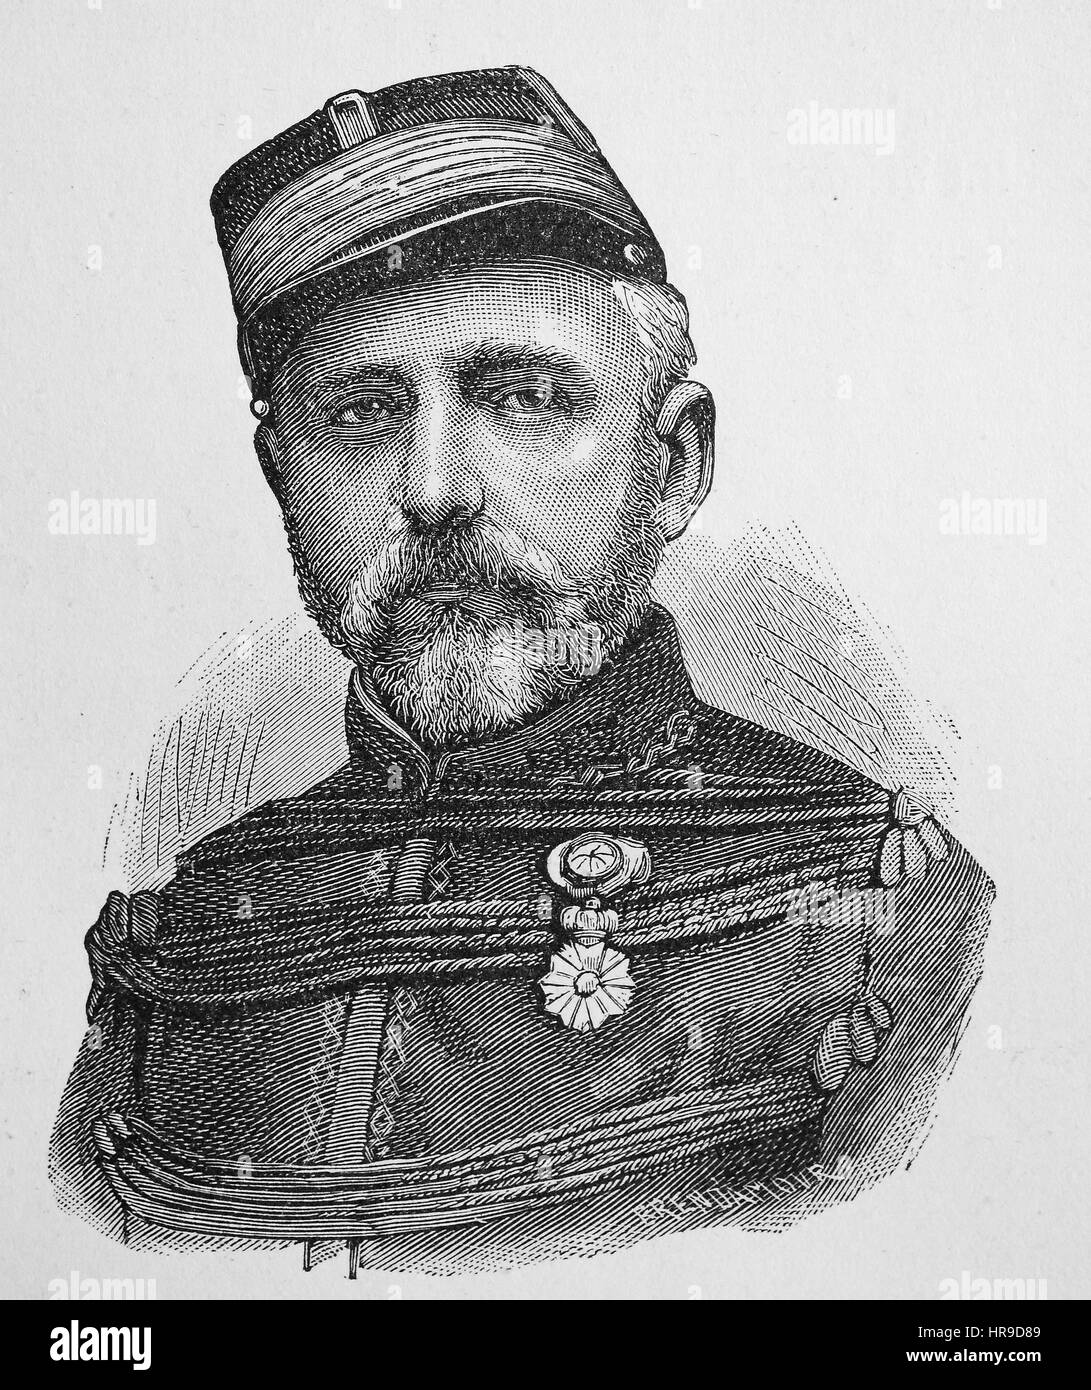 Felix Charles Douay, 1816 - 1879, was a general in the French army, Situation from the time of The Franco-Prussian War or Franco-German War,  Deutsch-Franzoesischer Krieg, 1870-1871, Reproduction of an original woodcut from the year 1885, digital improved Stock Photo